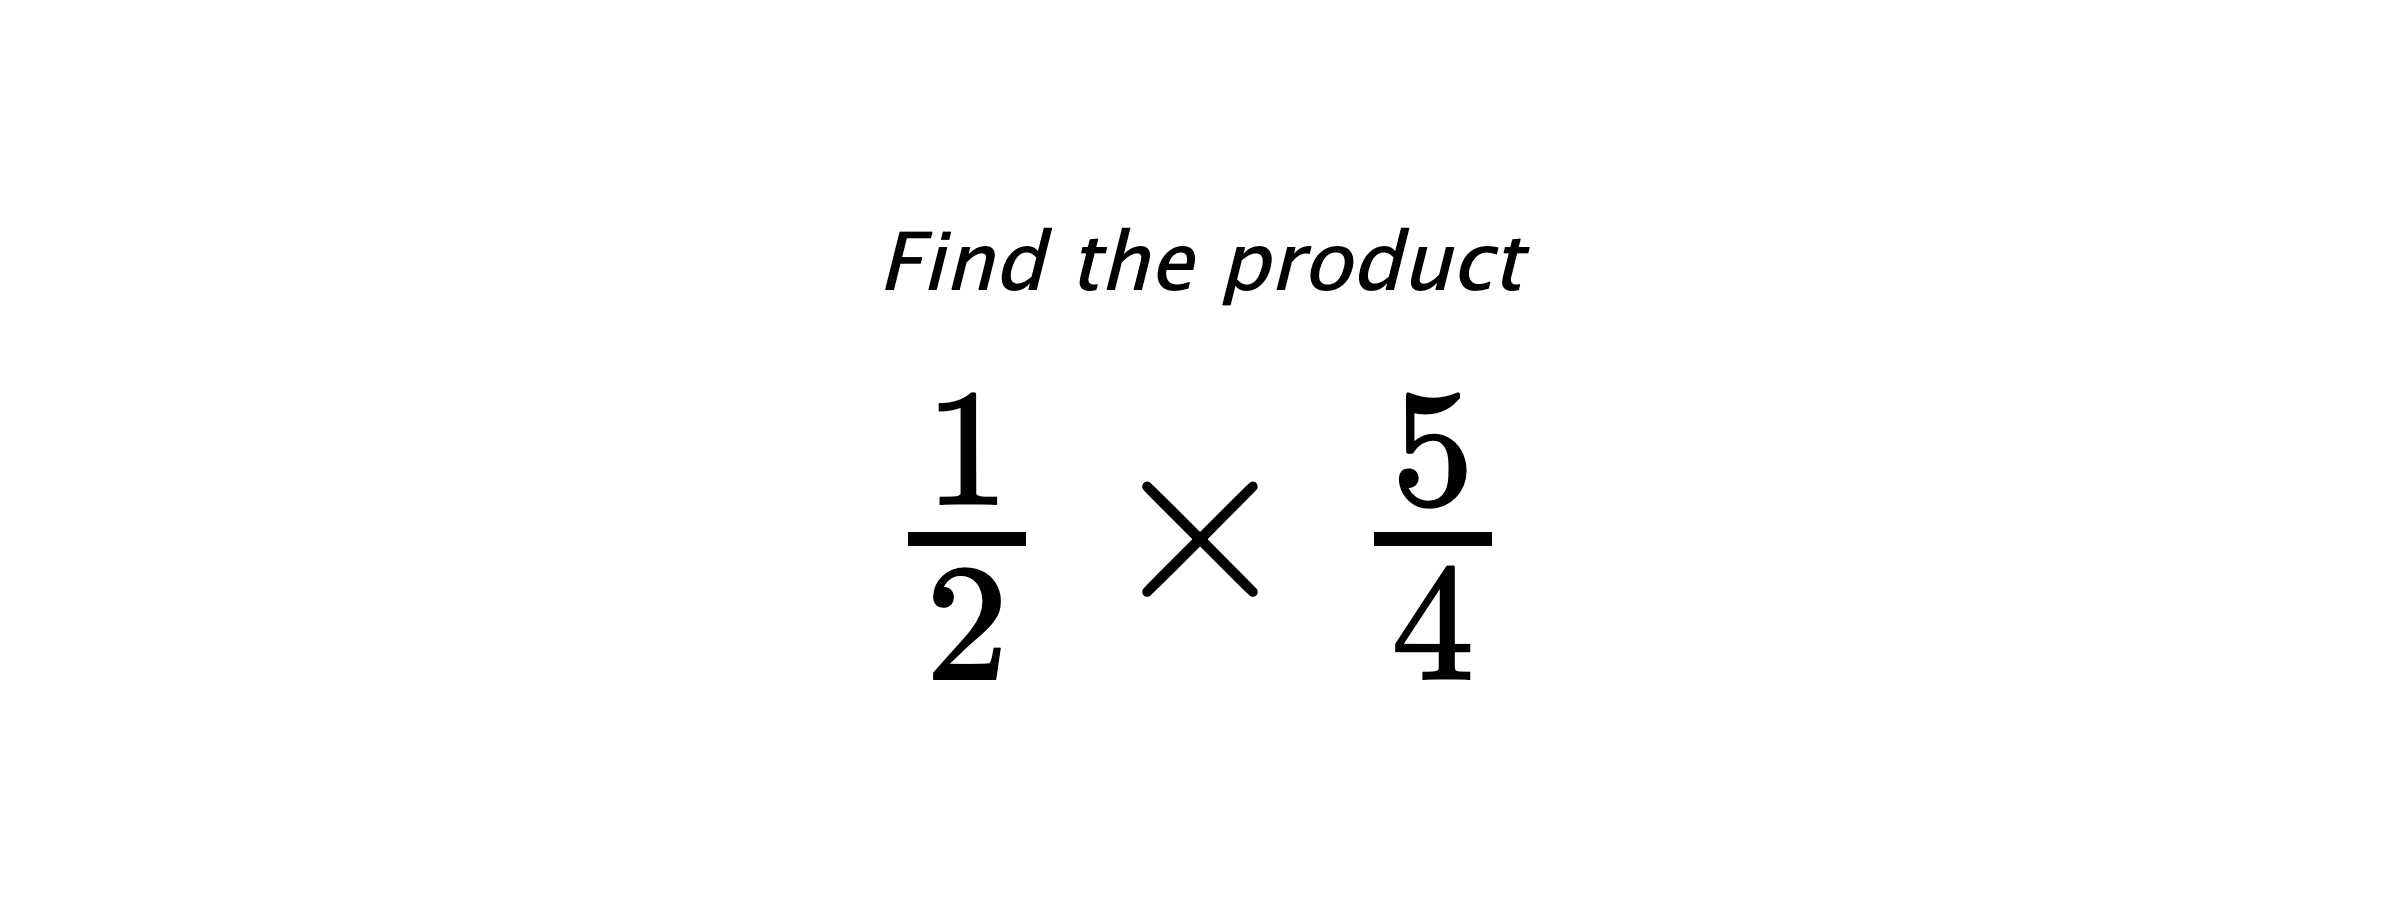 Find the product $ \frac{1}{2} \times \frac{5}{4} $